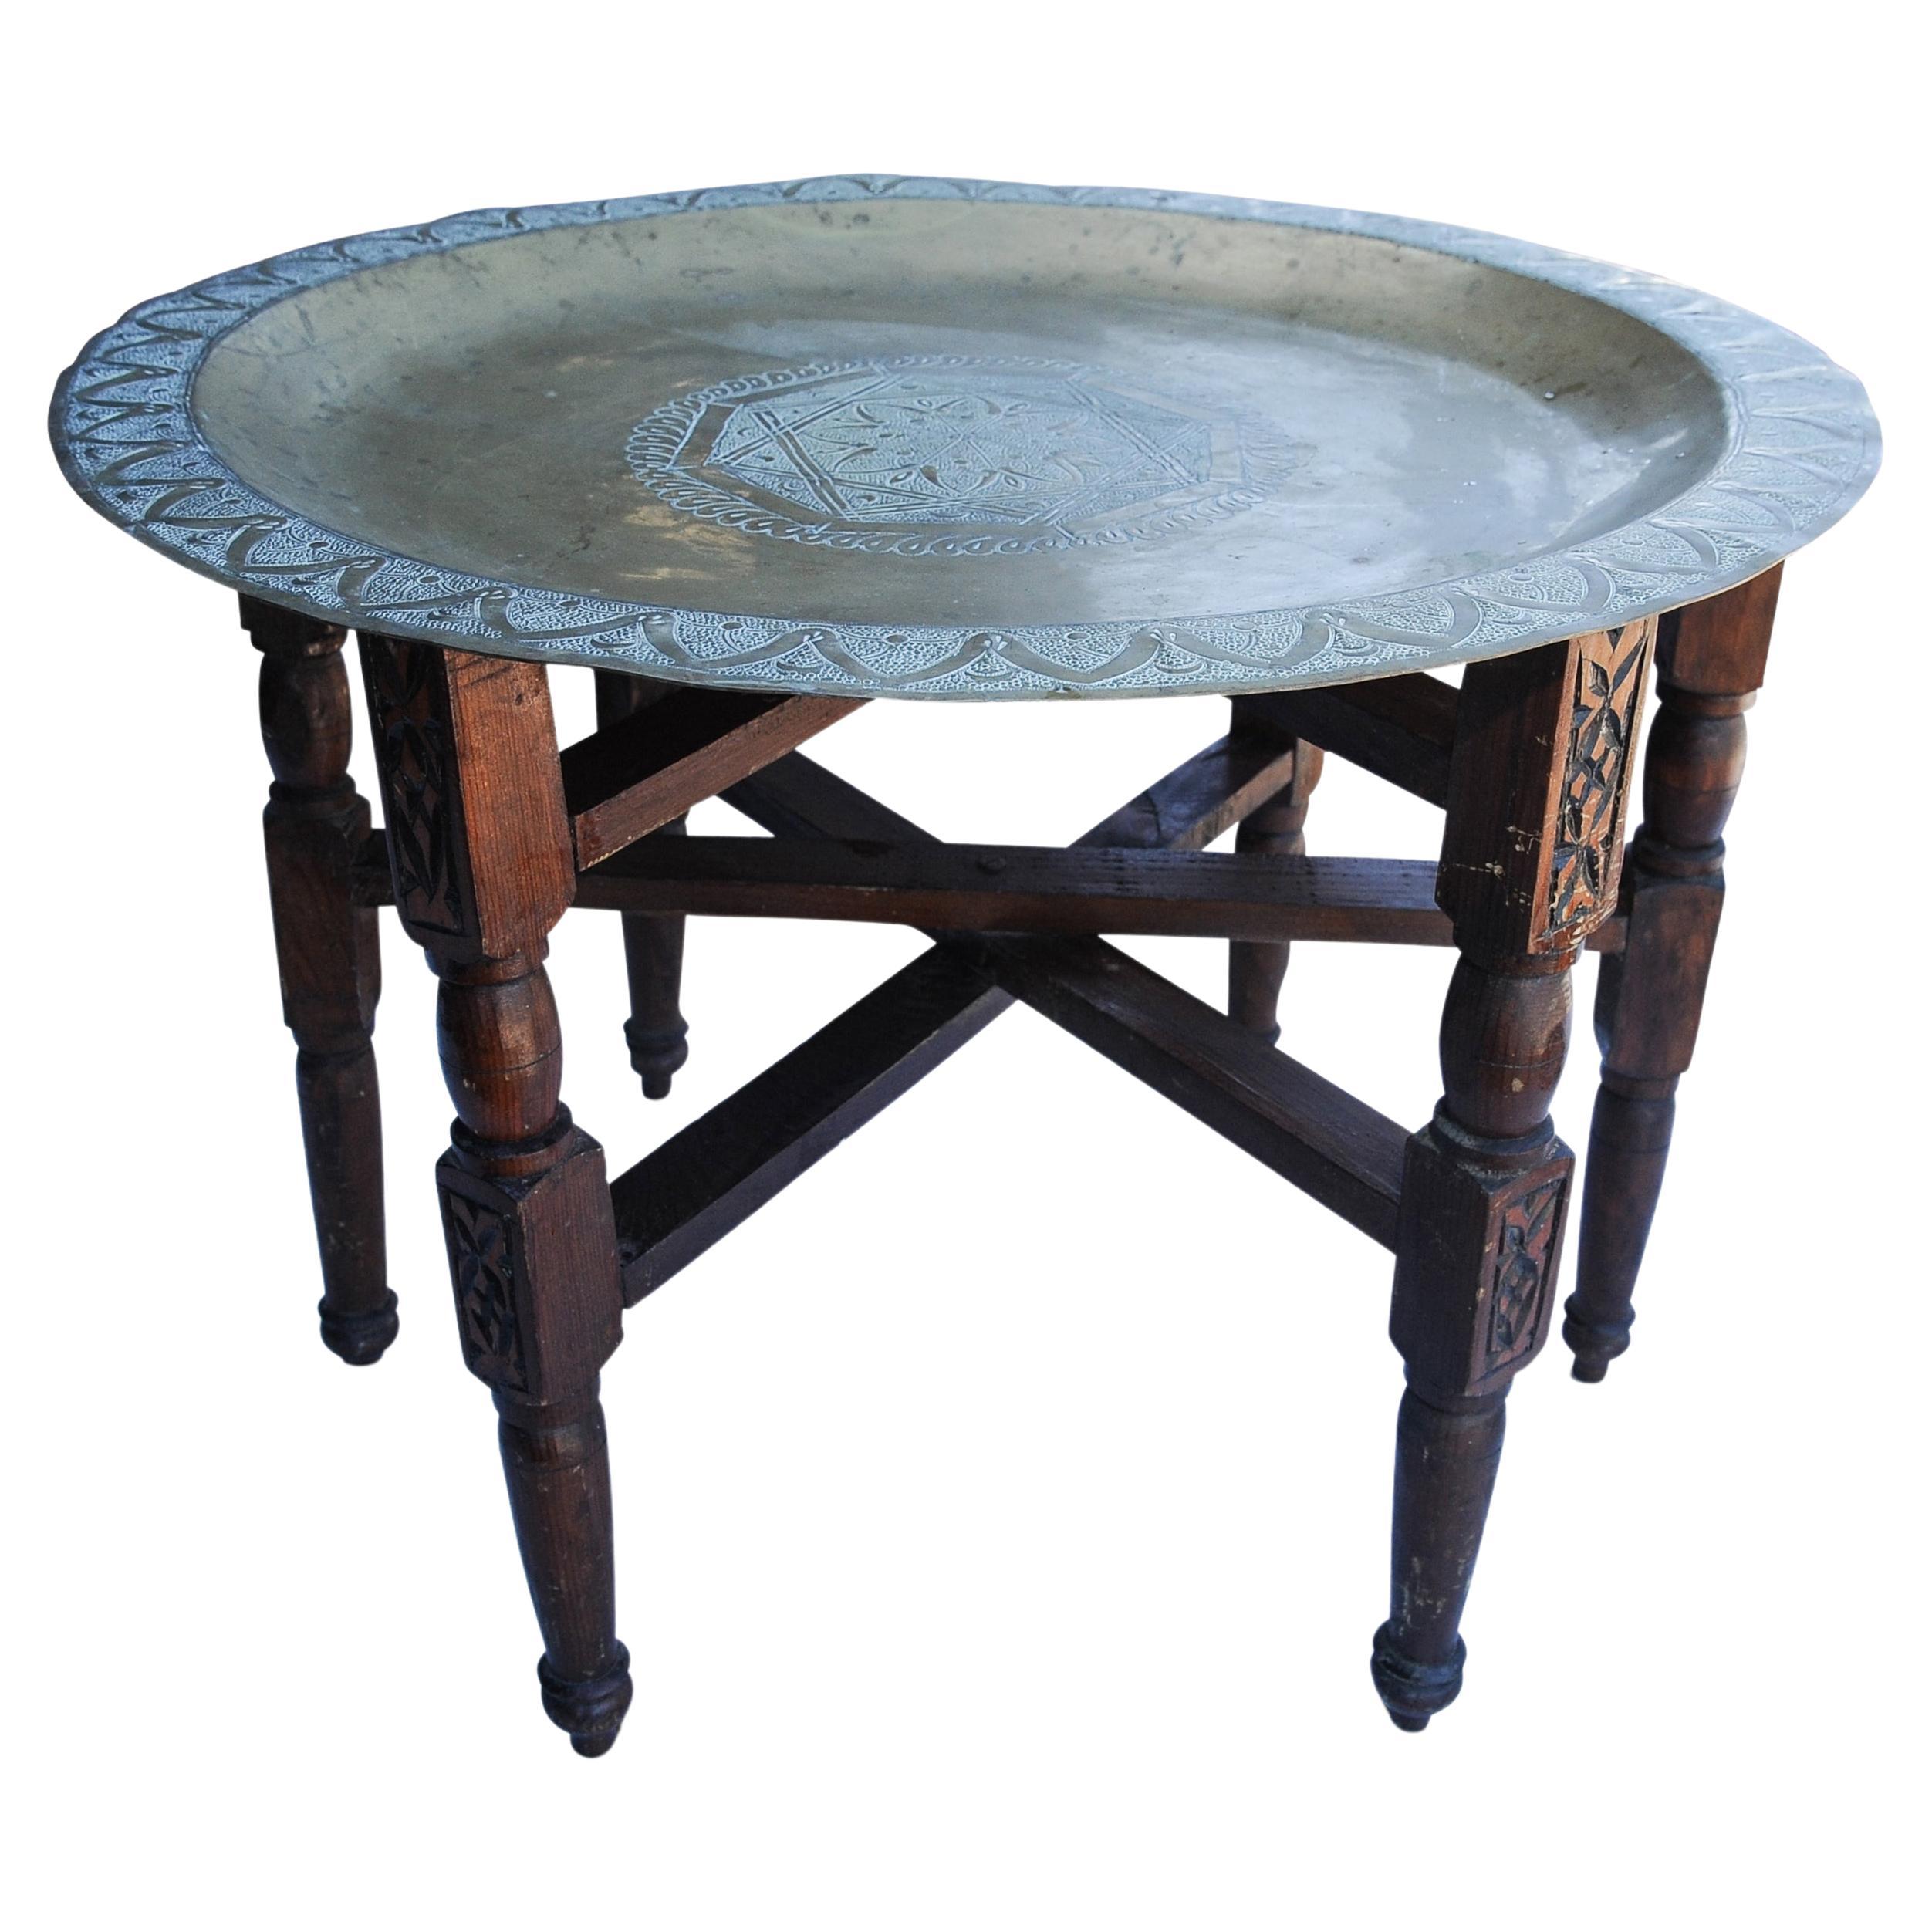 19th Century Brass And Hardwood Tea Table Decorated With Decorative Engraving from the Middle East. Tray Can Be Lifted Off The Frame, And Used Separately. 

